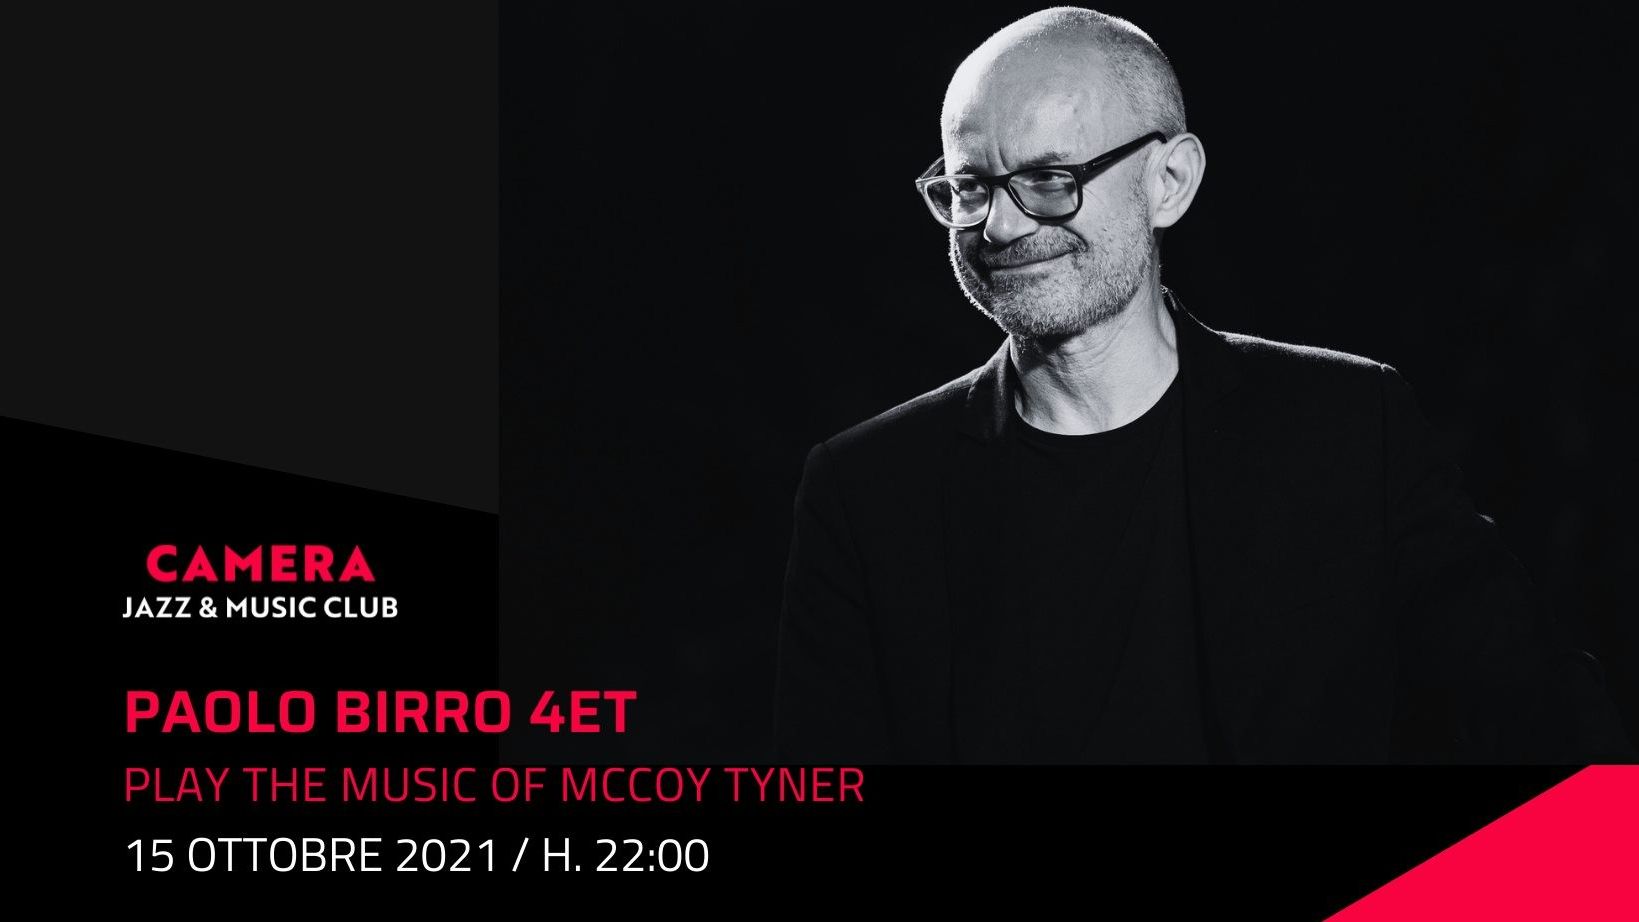 Paolo Birro 4ET "Play the music of McCoy Tyner"